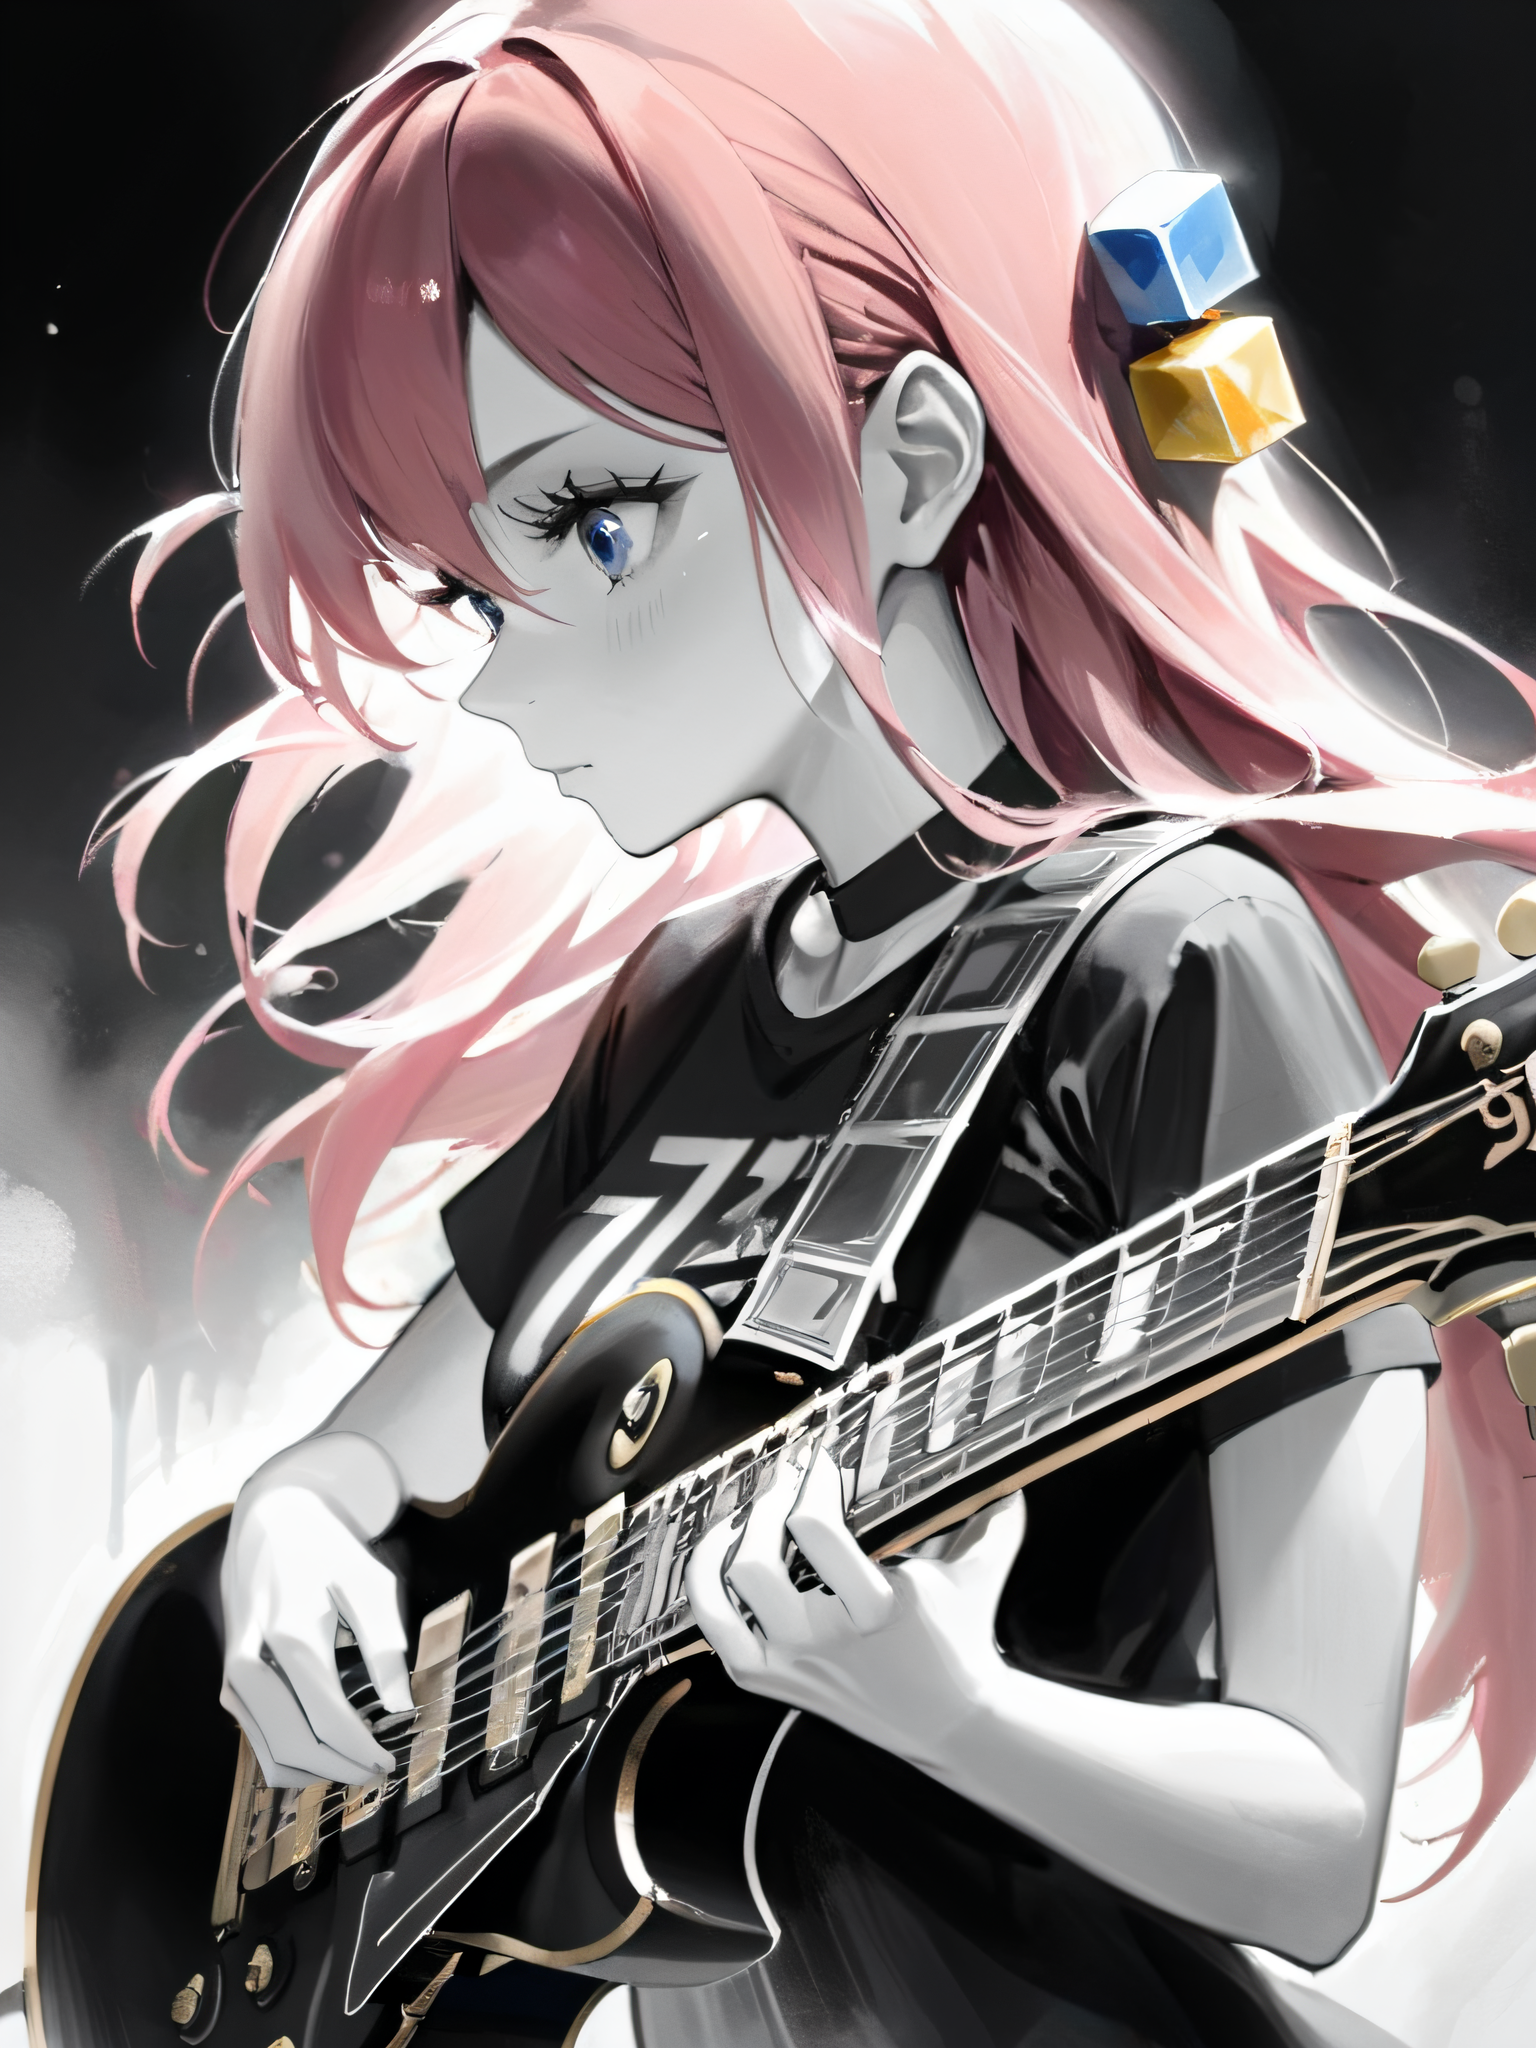 monochrome cube hair ornament, a young girl with pink hair and blue eyes, playing a Gibson Les Paul electric guitar with p...